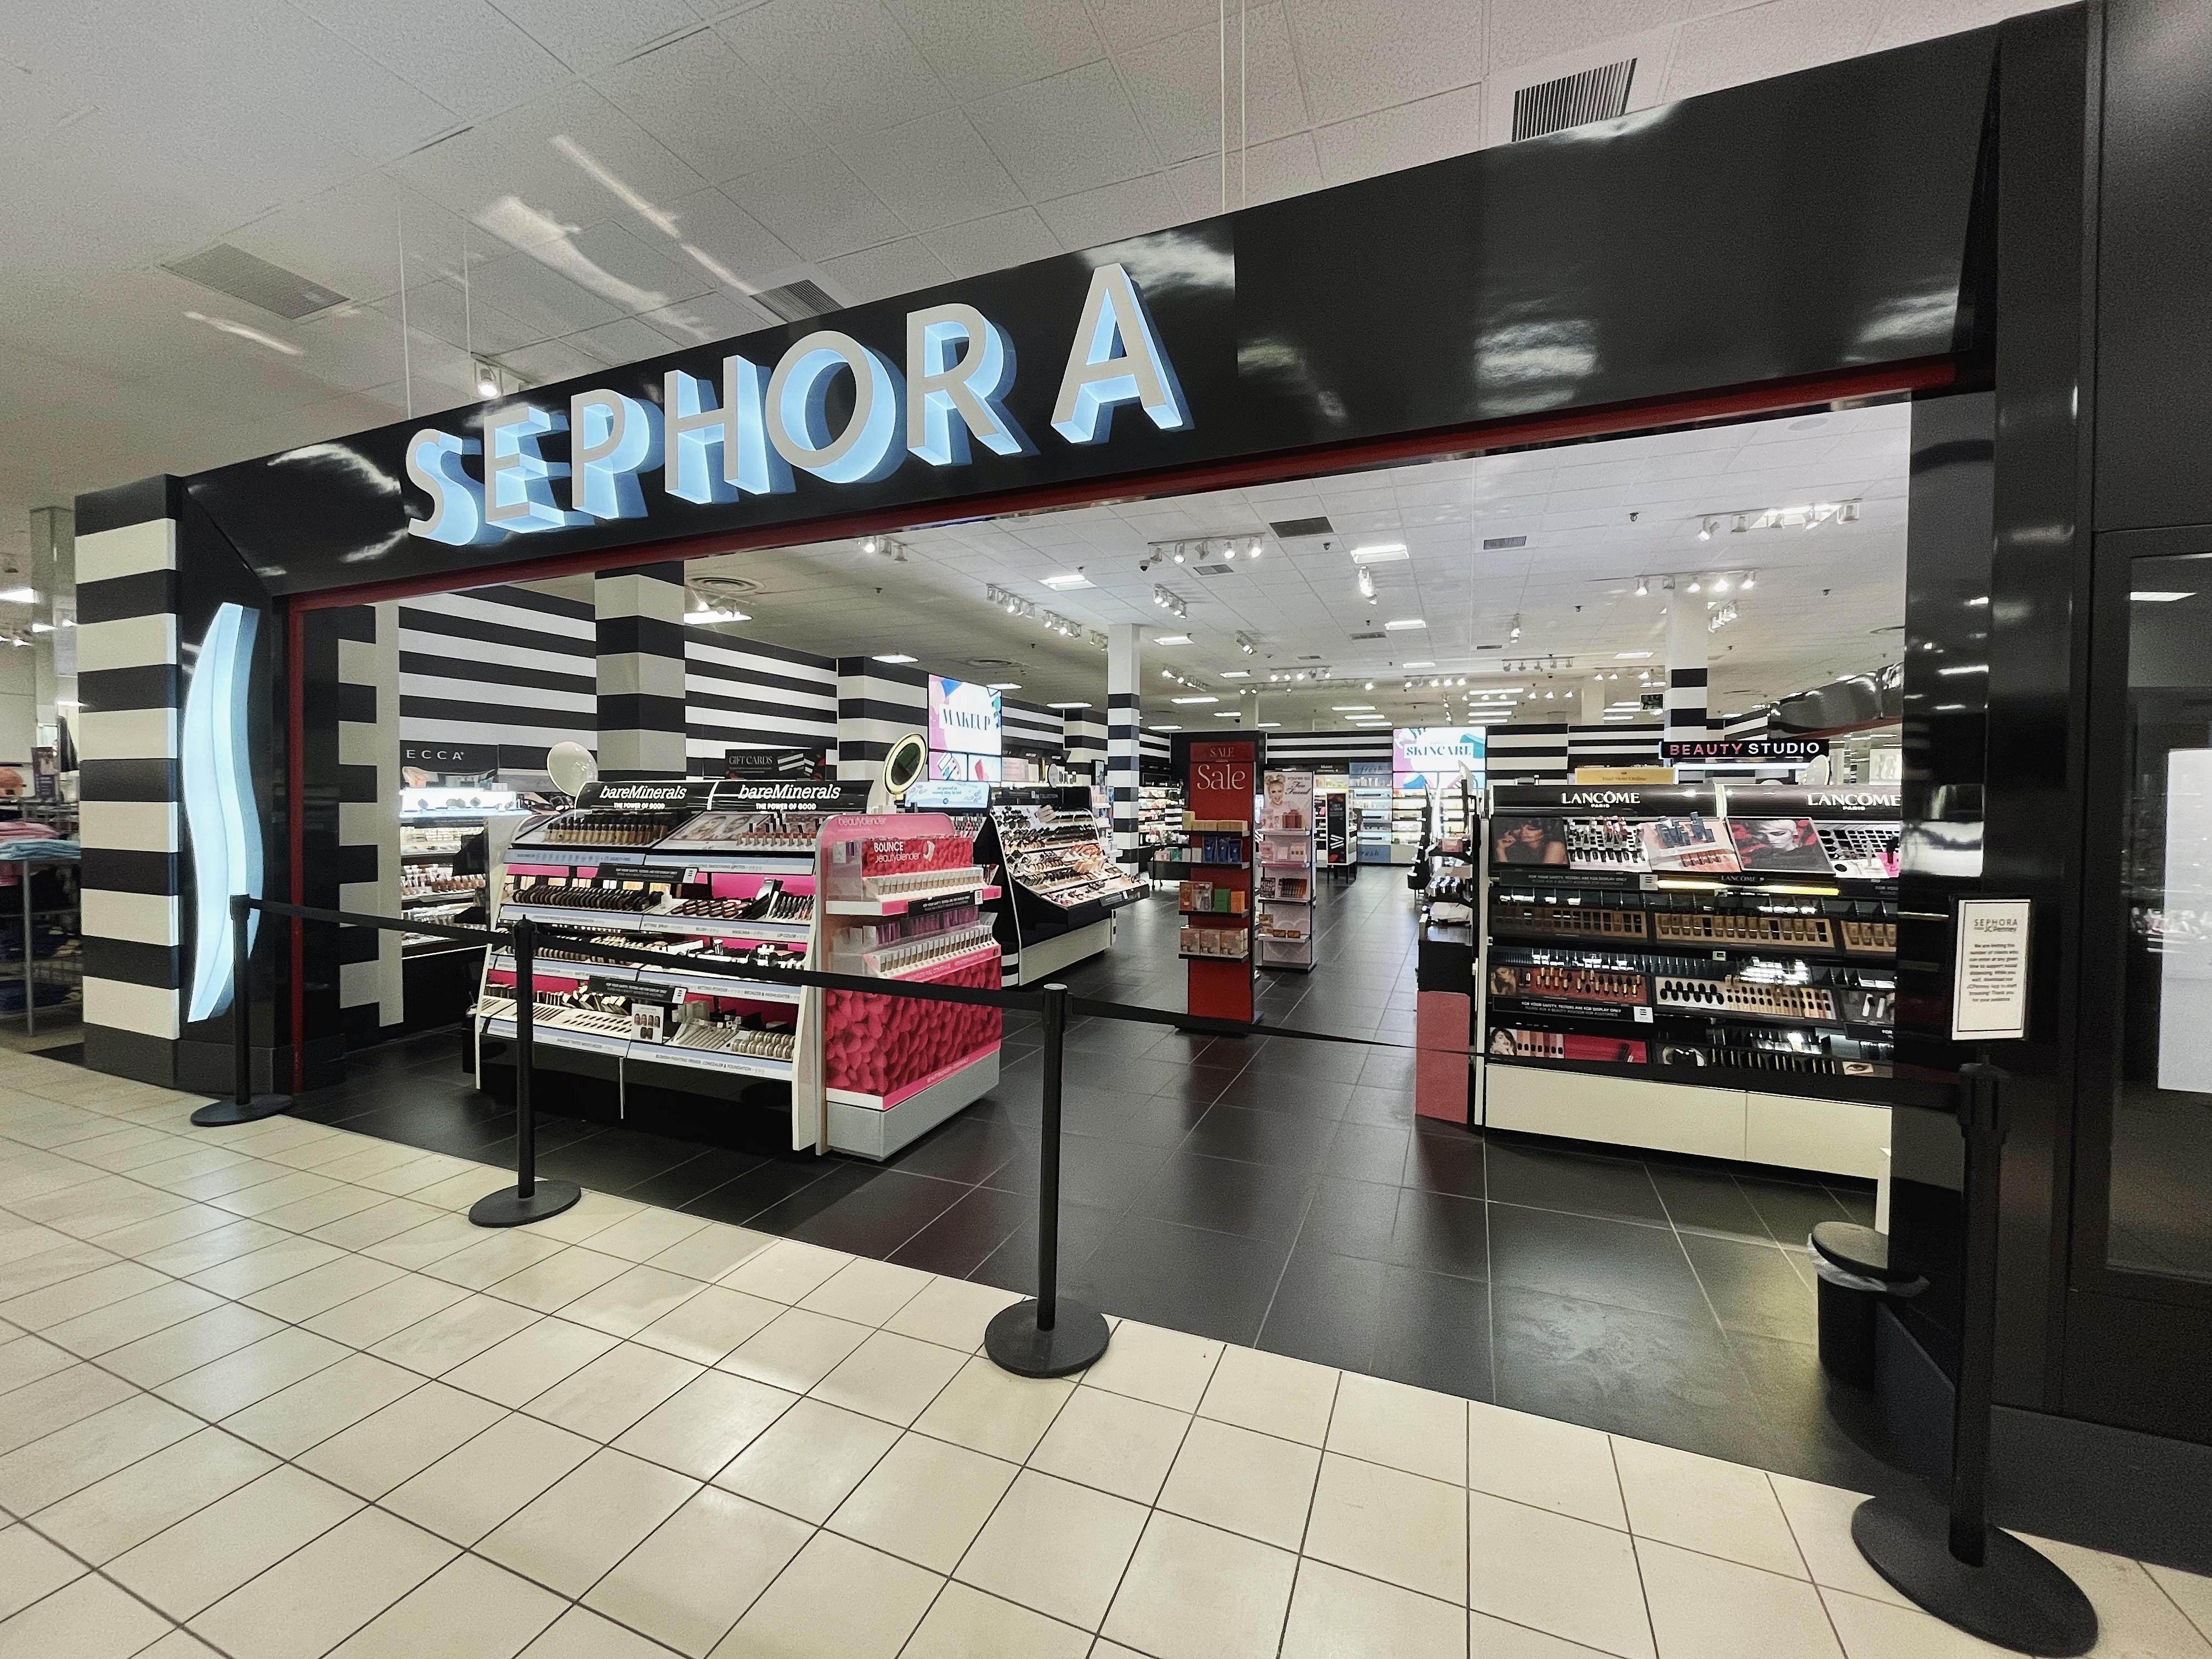 SEPHORA: In a retail landscape where experience is increasingly